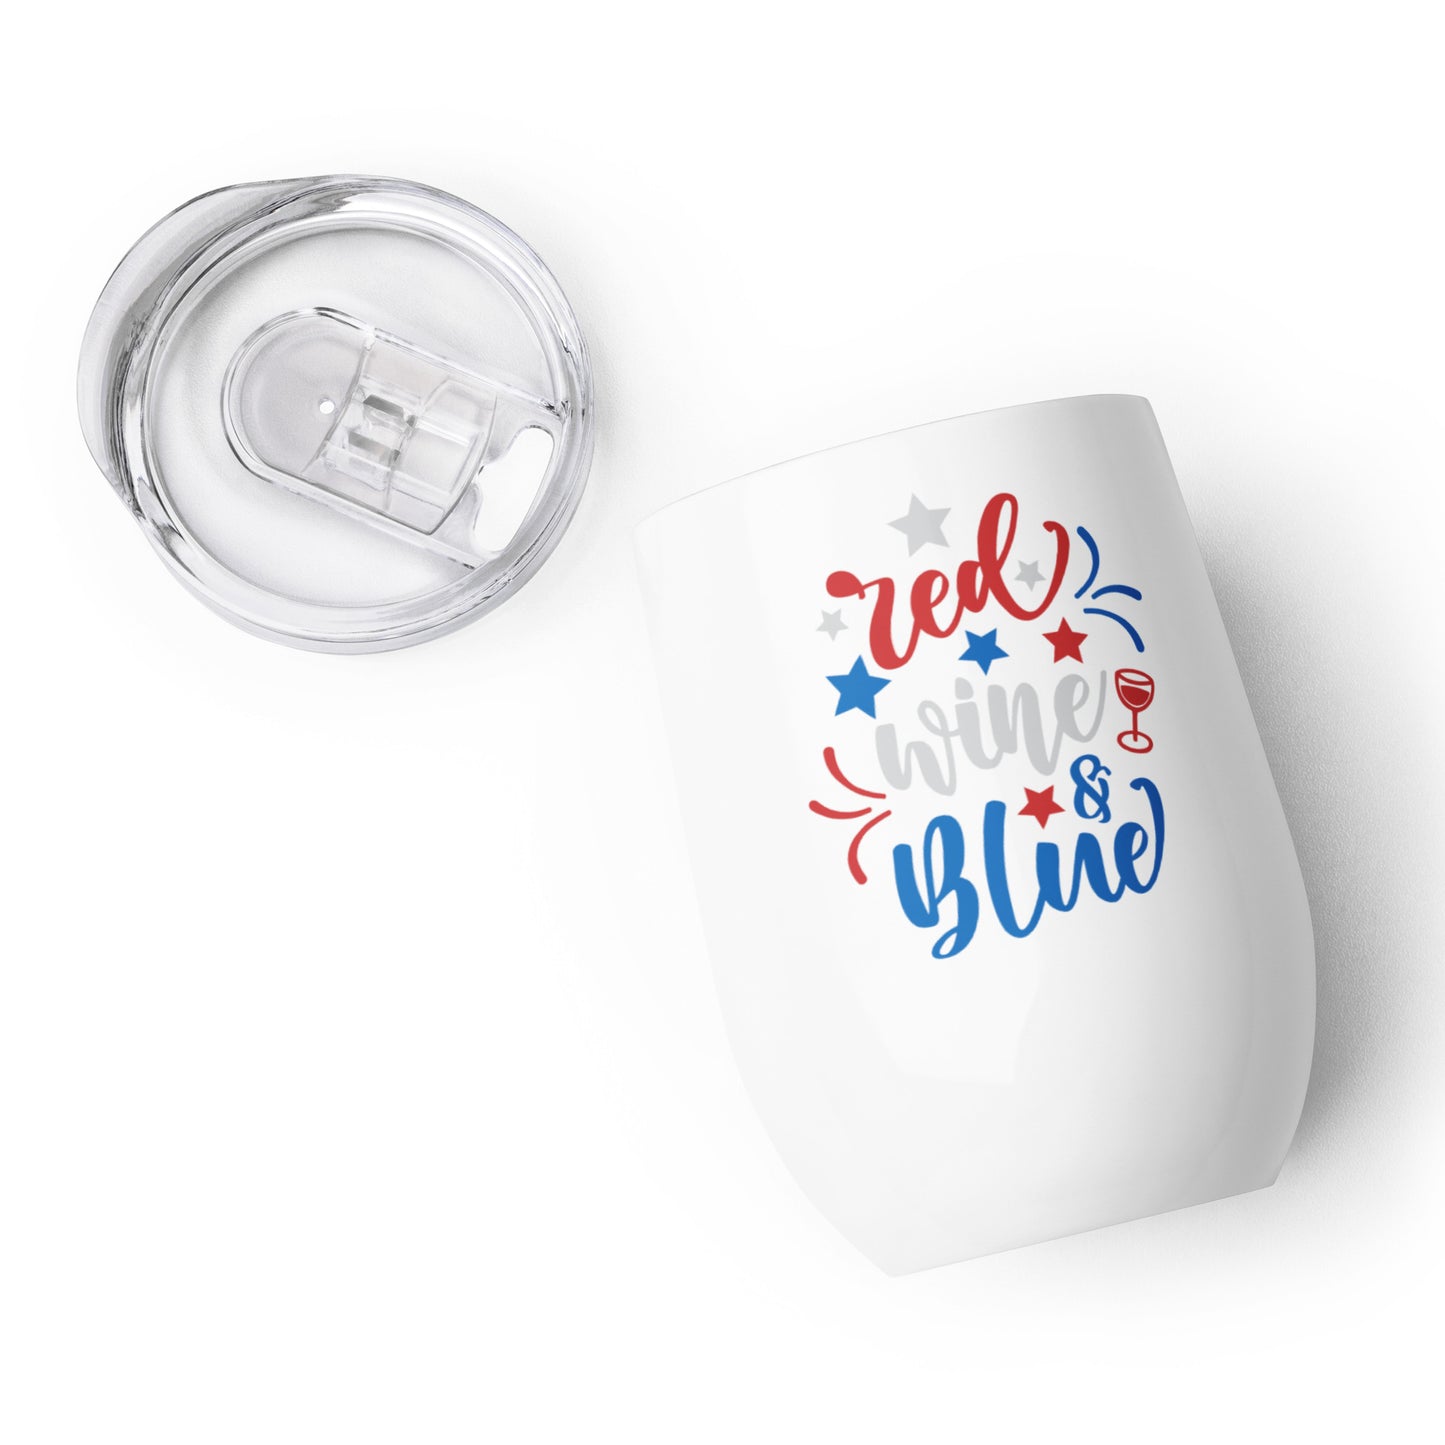 Red, Wine and Blue Wine tumbler